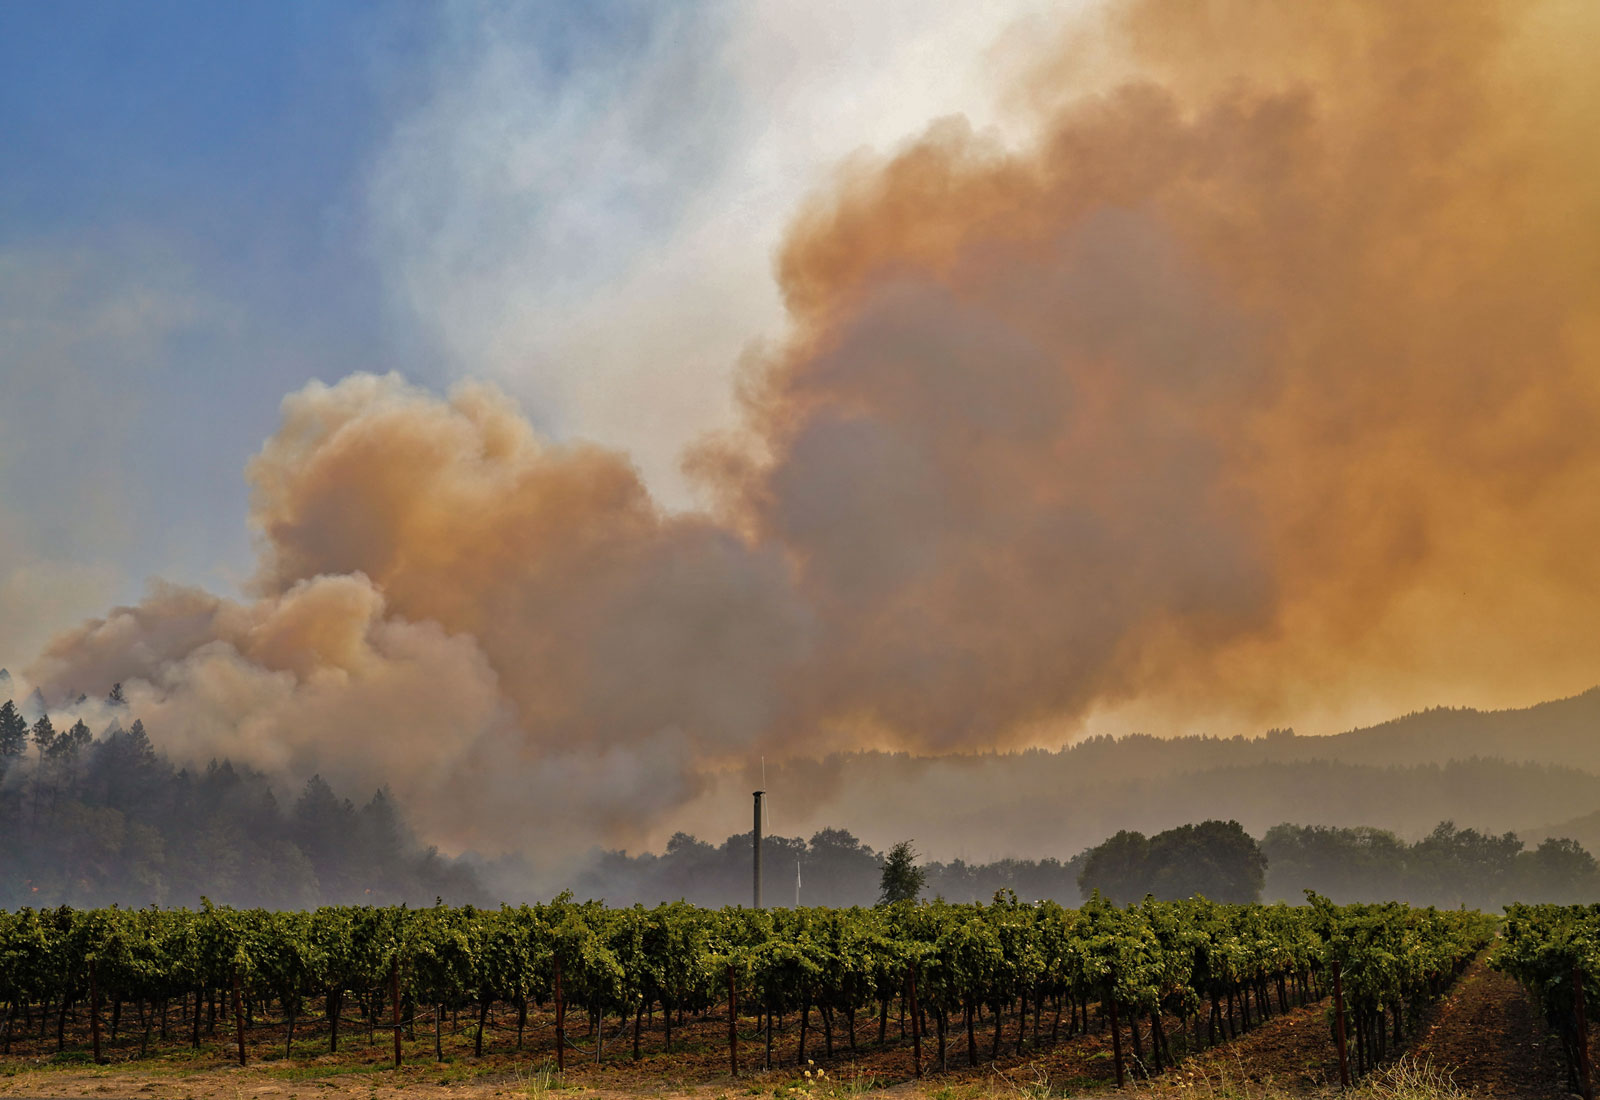 Smoke from a wildfire rising above a field of grape vines